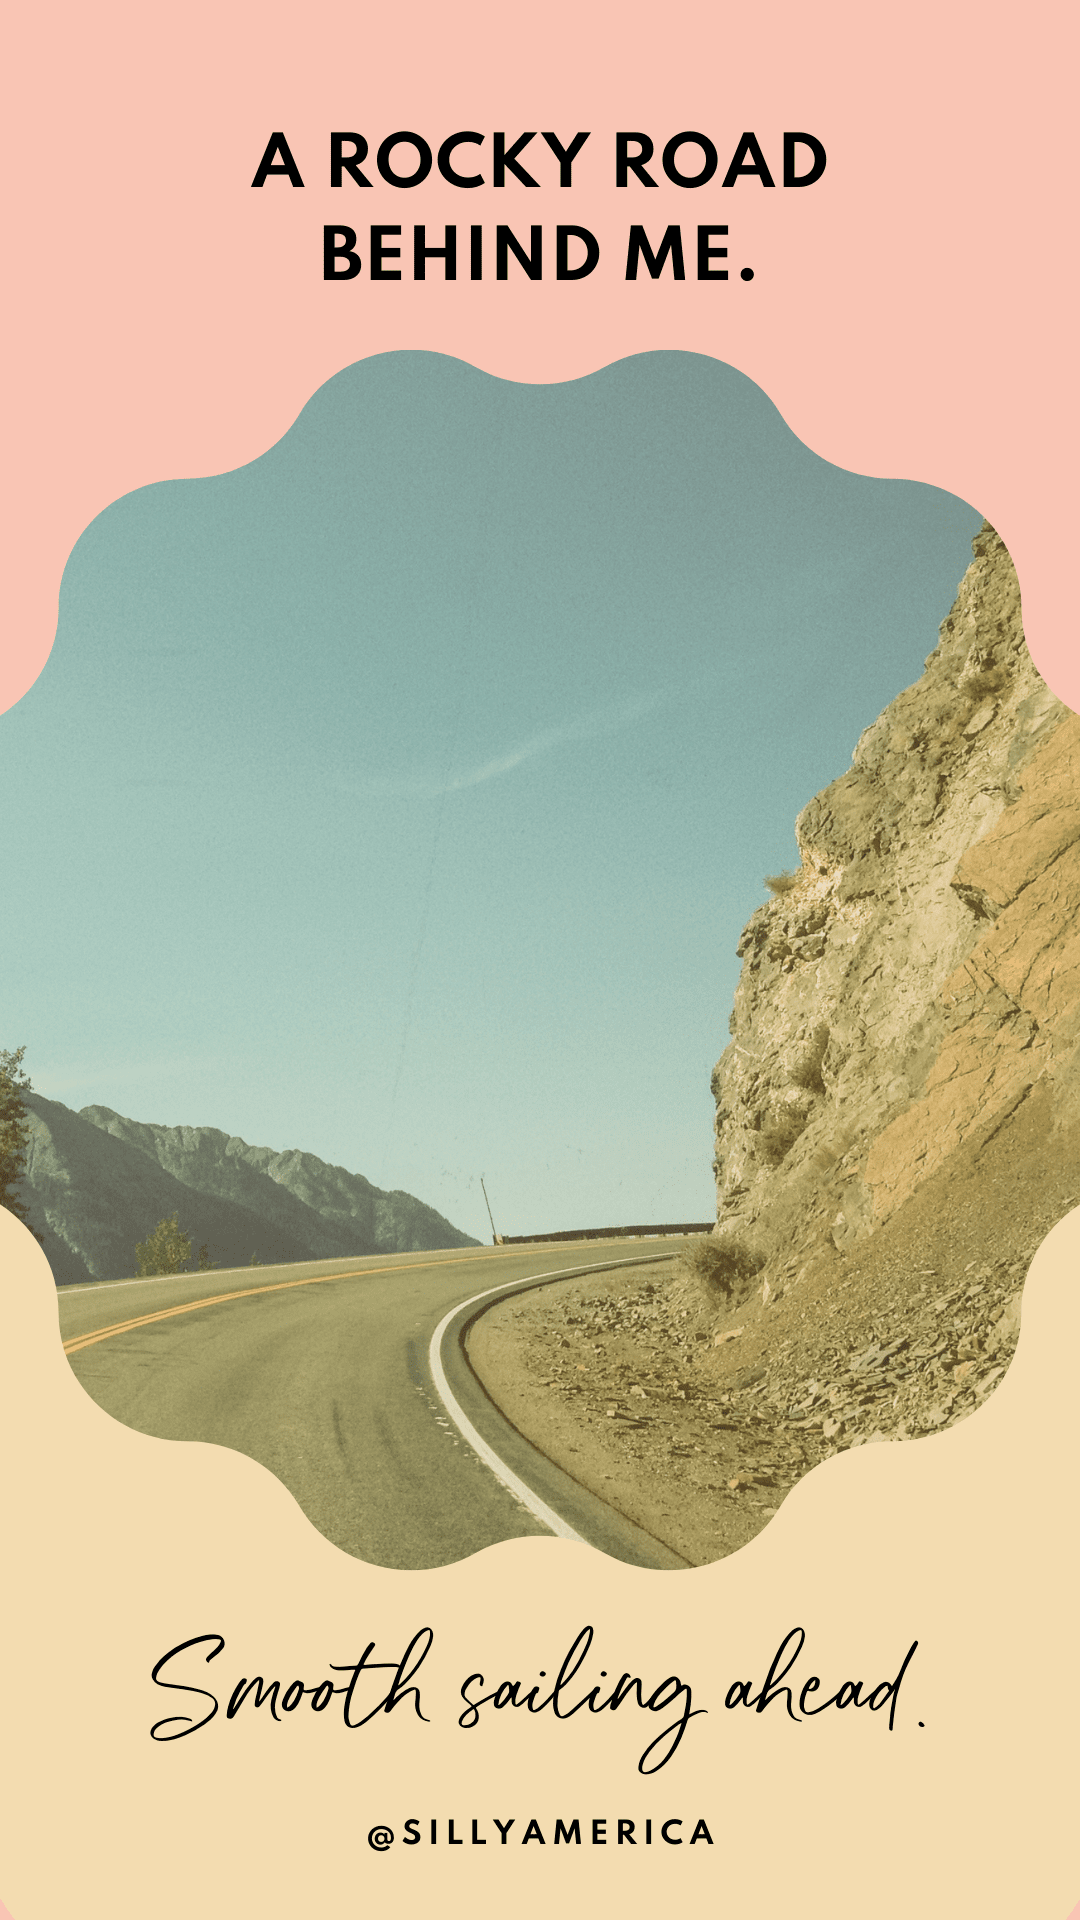 A rocky road behind me. Smooth sailing ahead. - Road Trip Captions for Instagram